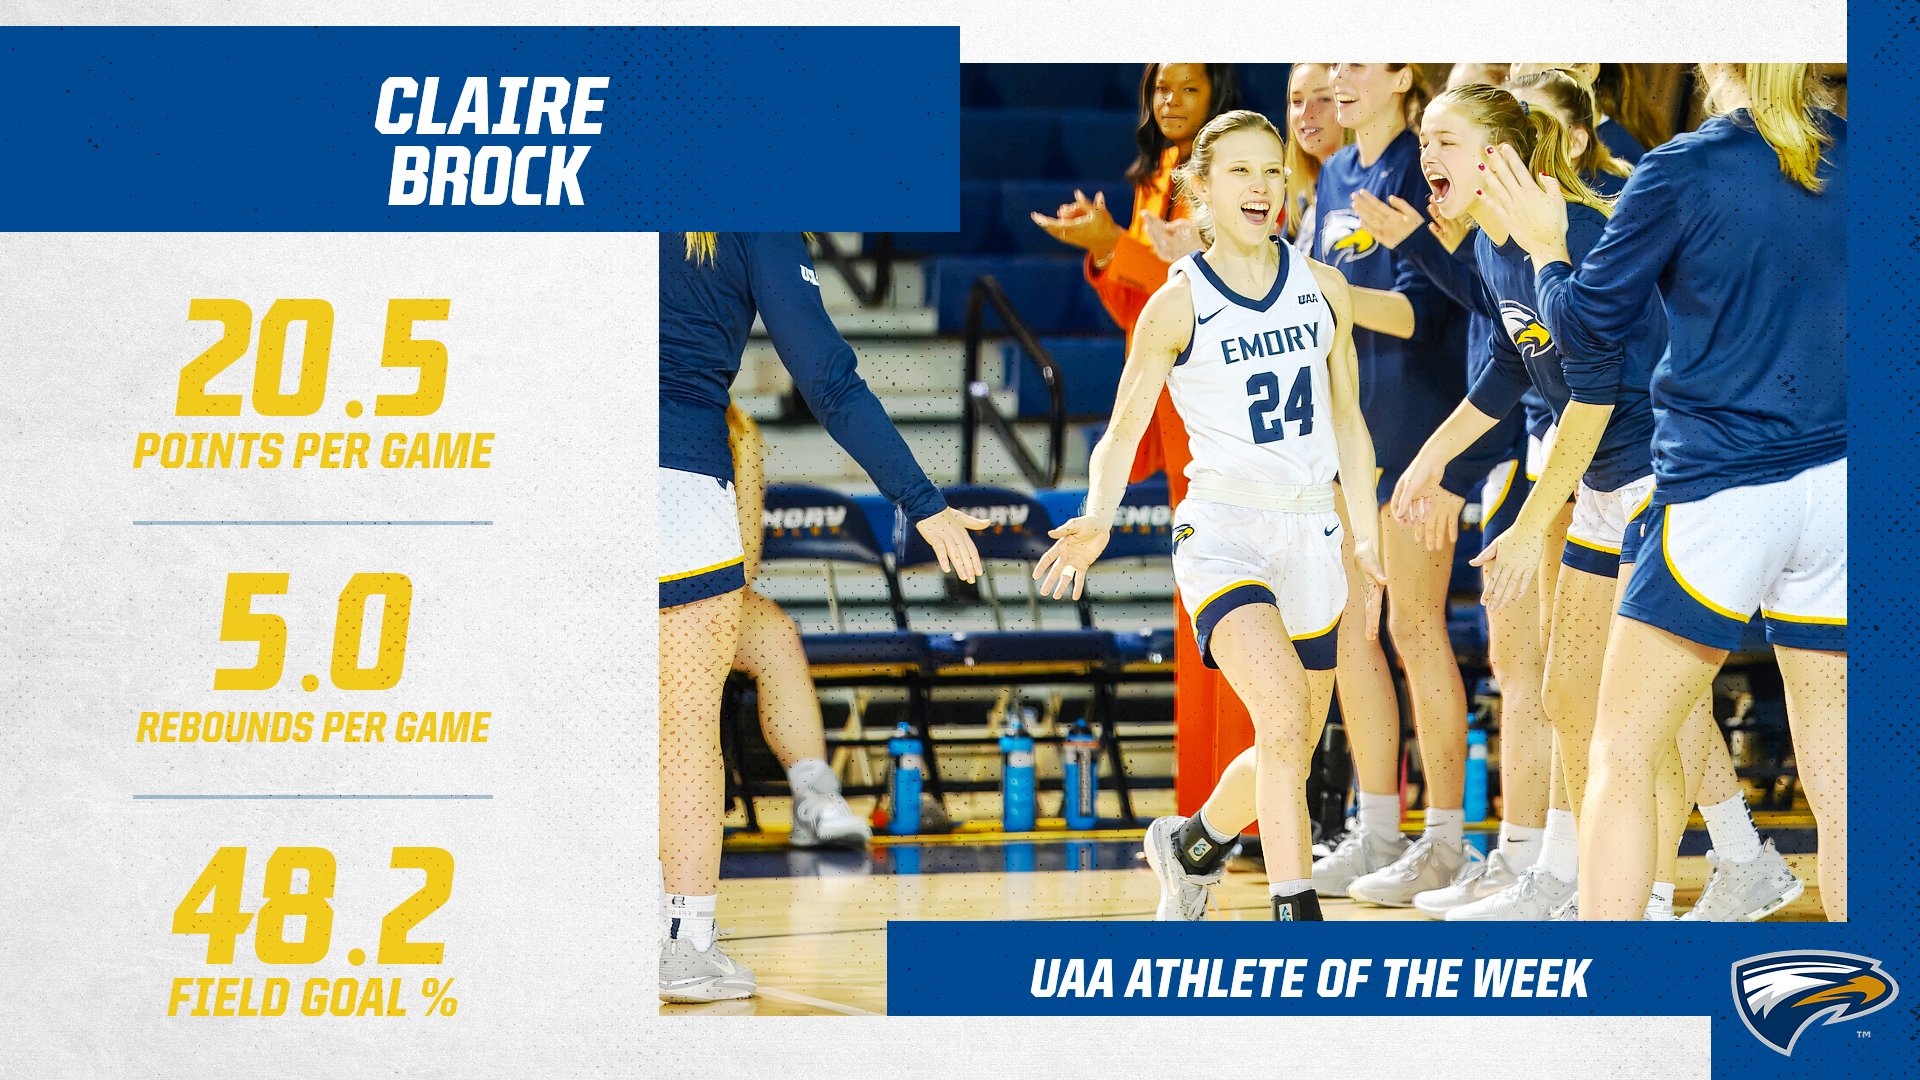 Claire Brock Named UAA Athlete of the Week for Third Time